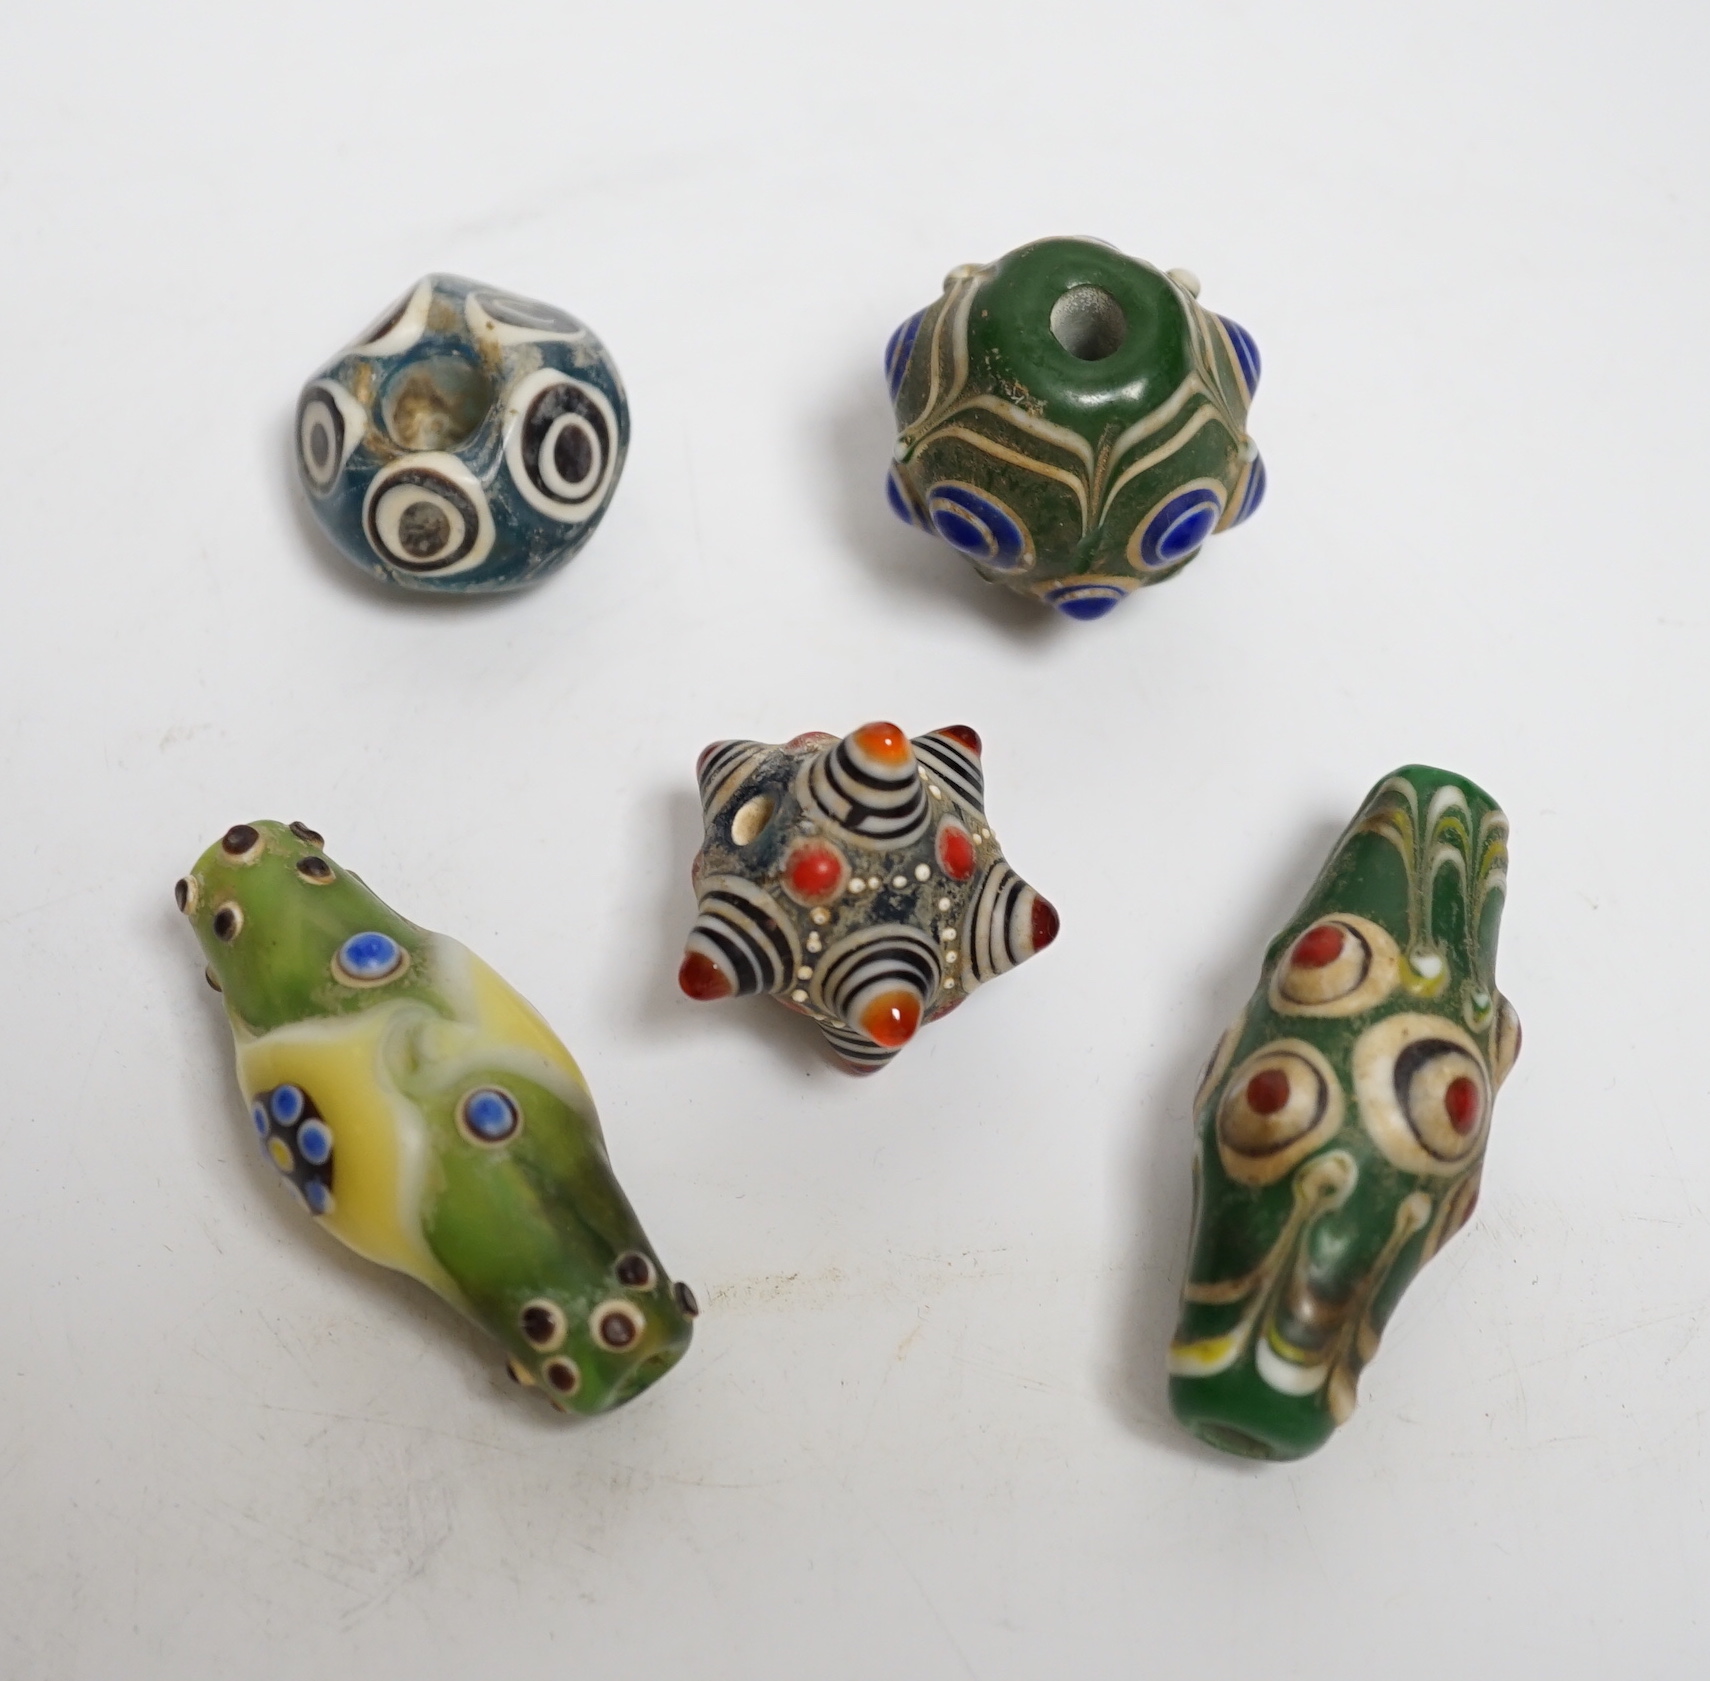 Five Eastern glass beads, largest 5.5cm long